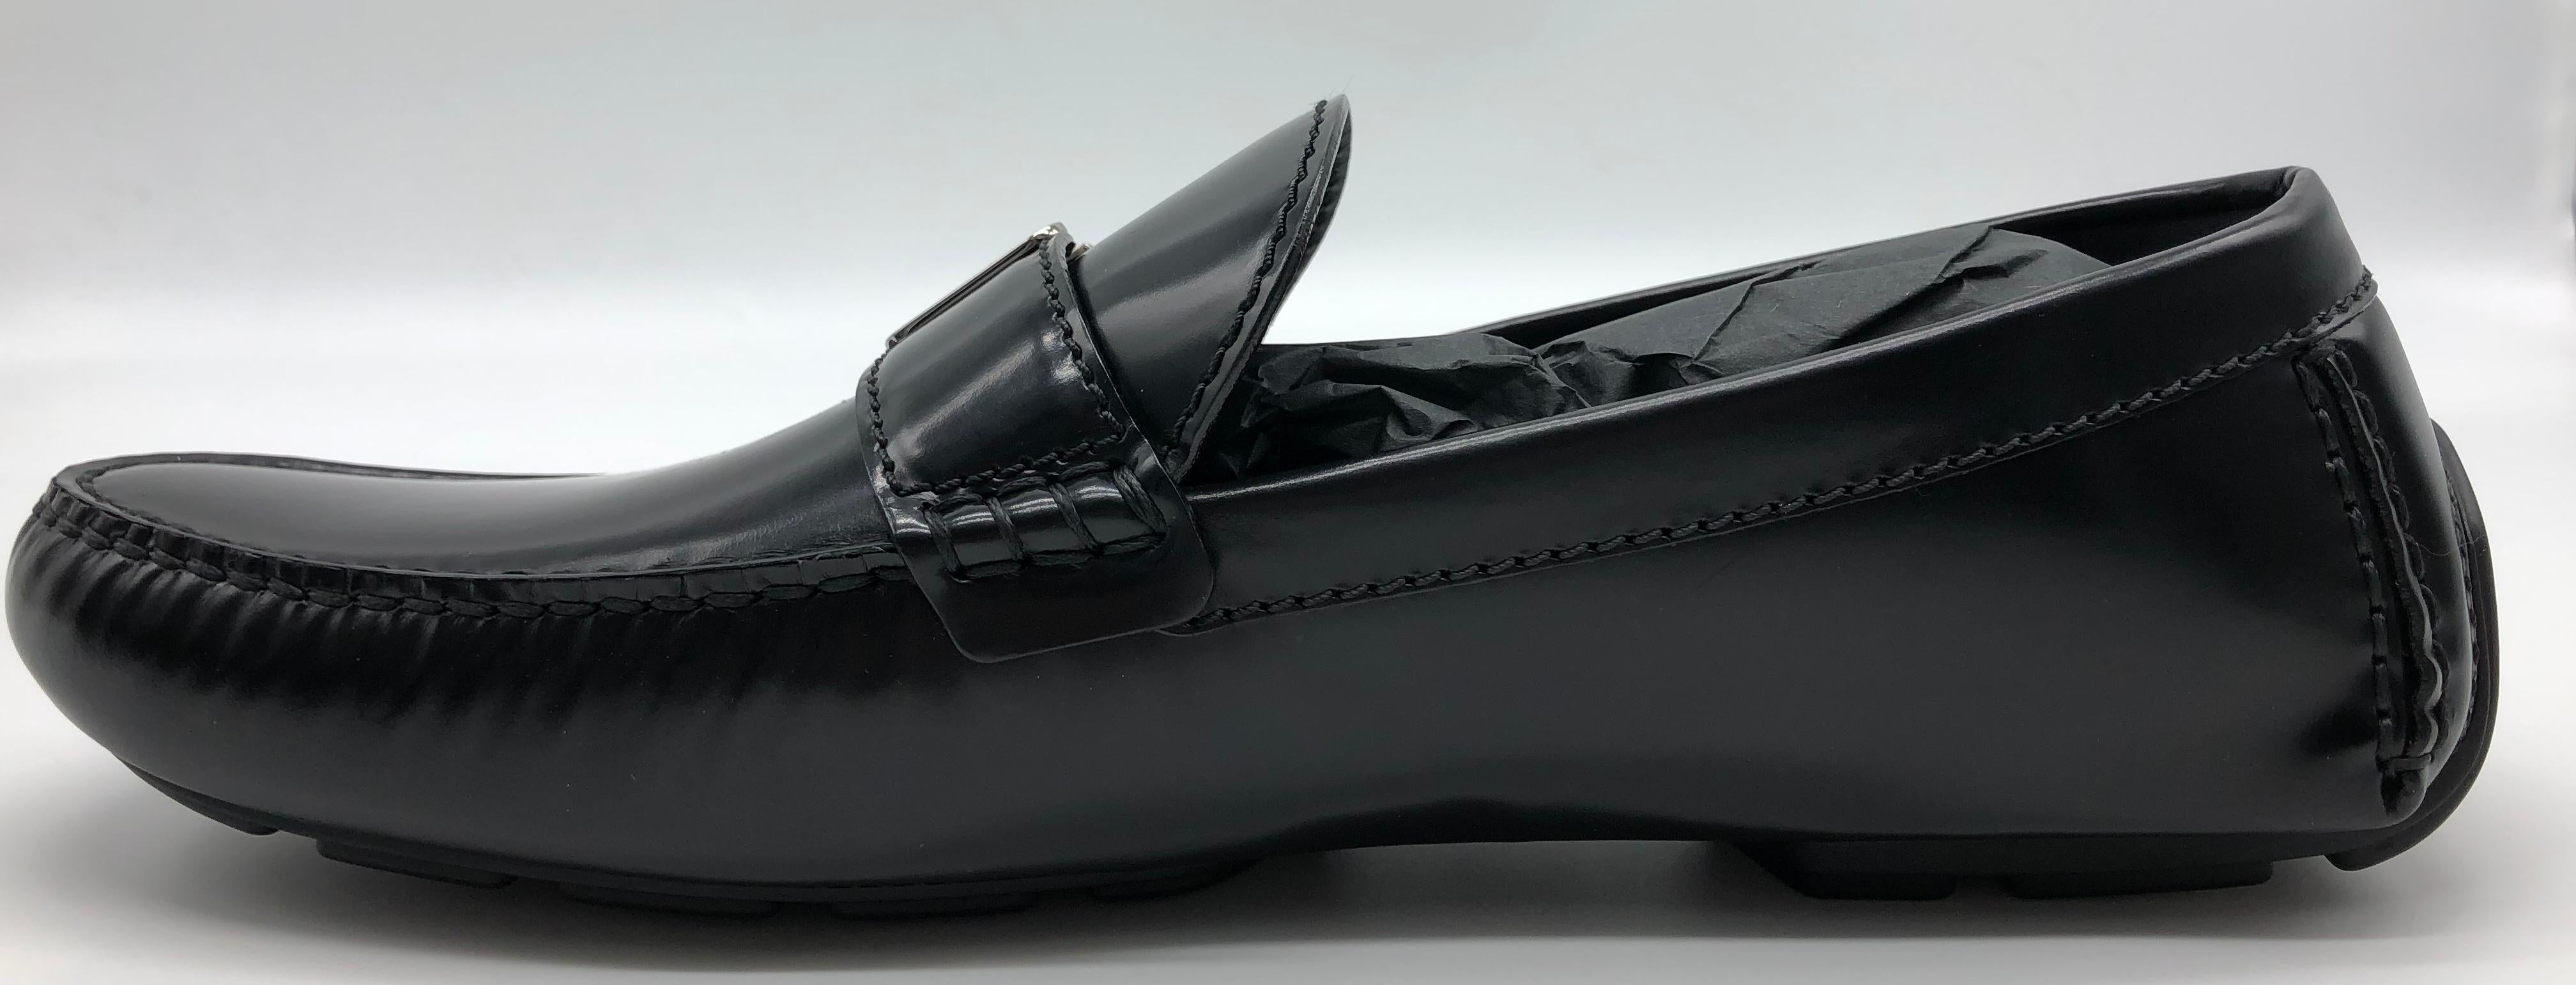 Louis Vuitton loafers for men in black leather
Model : RaceTrack Car shoe
Size : 12 (46) 
New, never used, comes with box